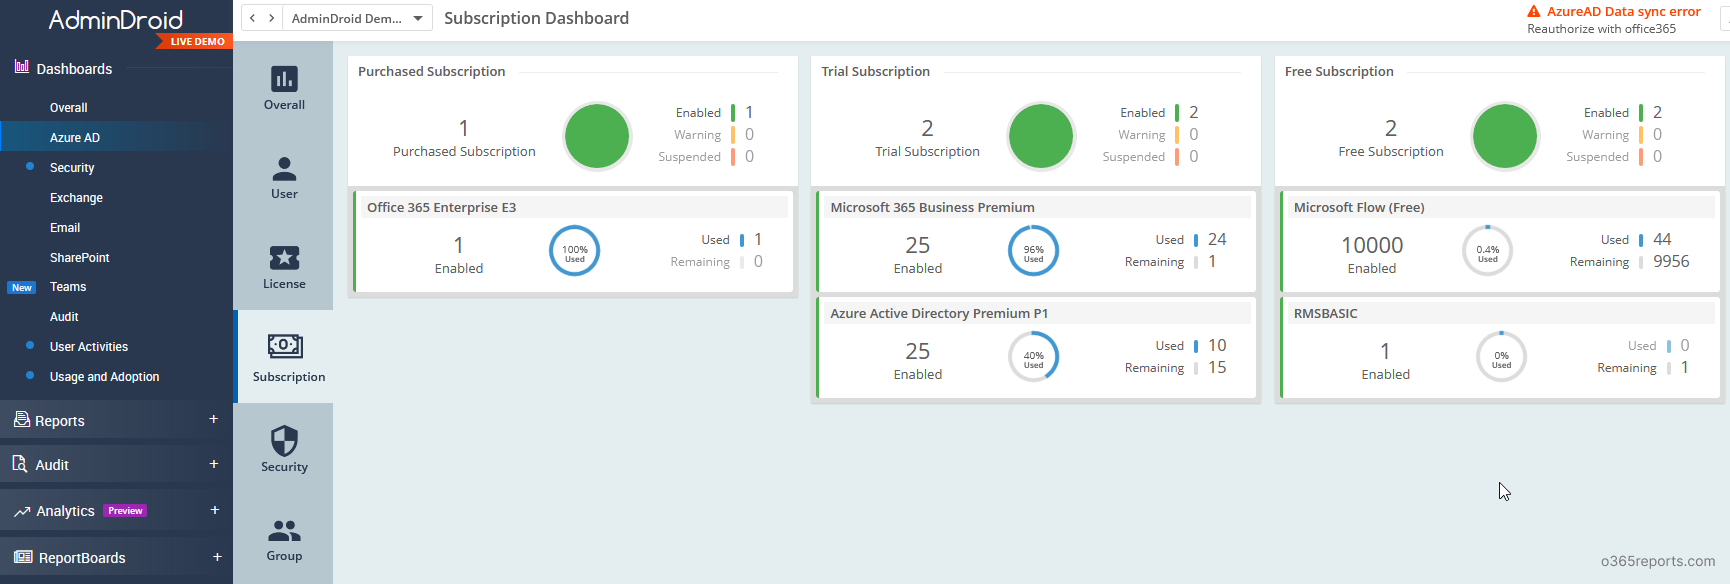 Microsoft 365 subscription dashboard by AdminDroid